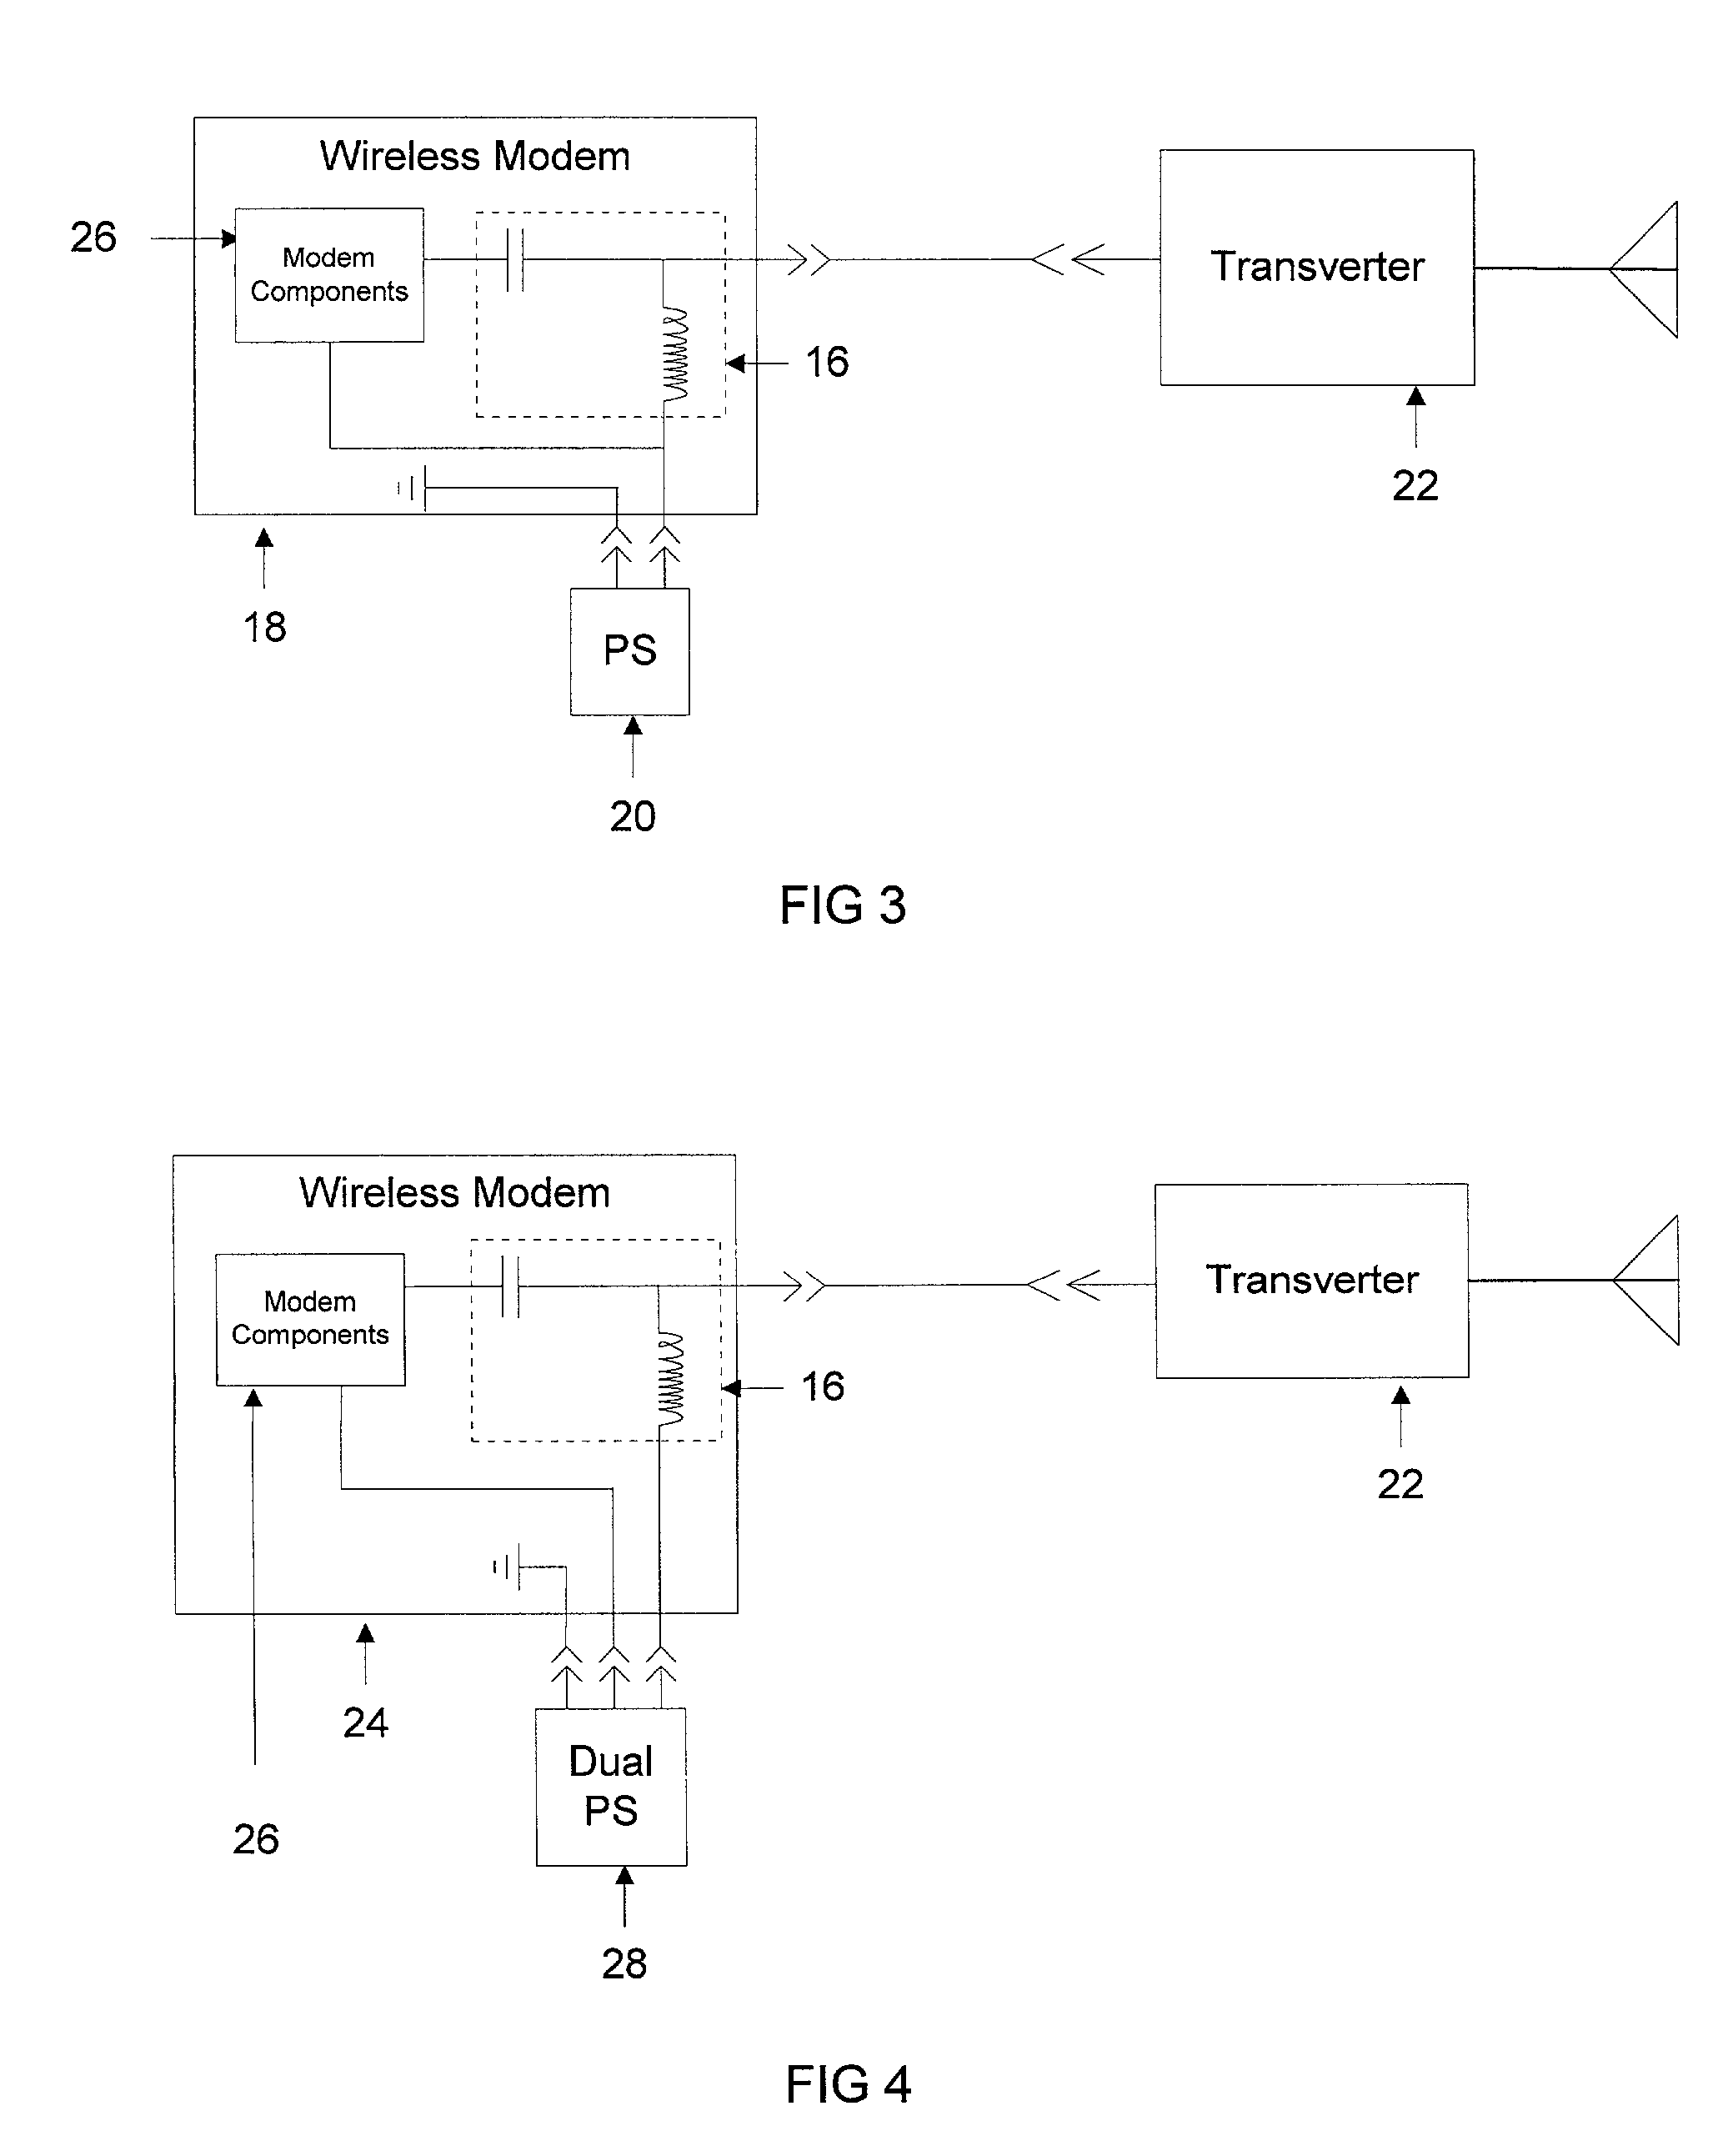 Power inserter configuration for wireless modems